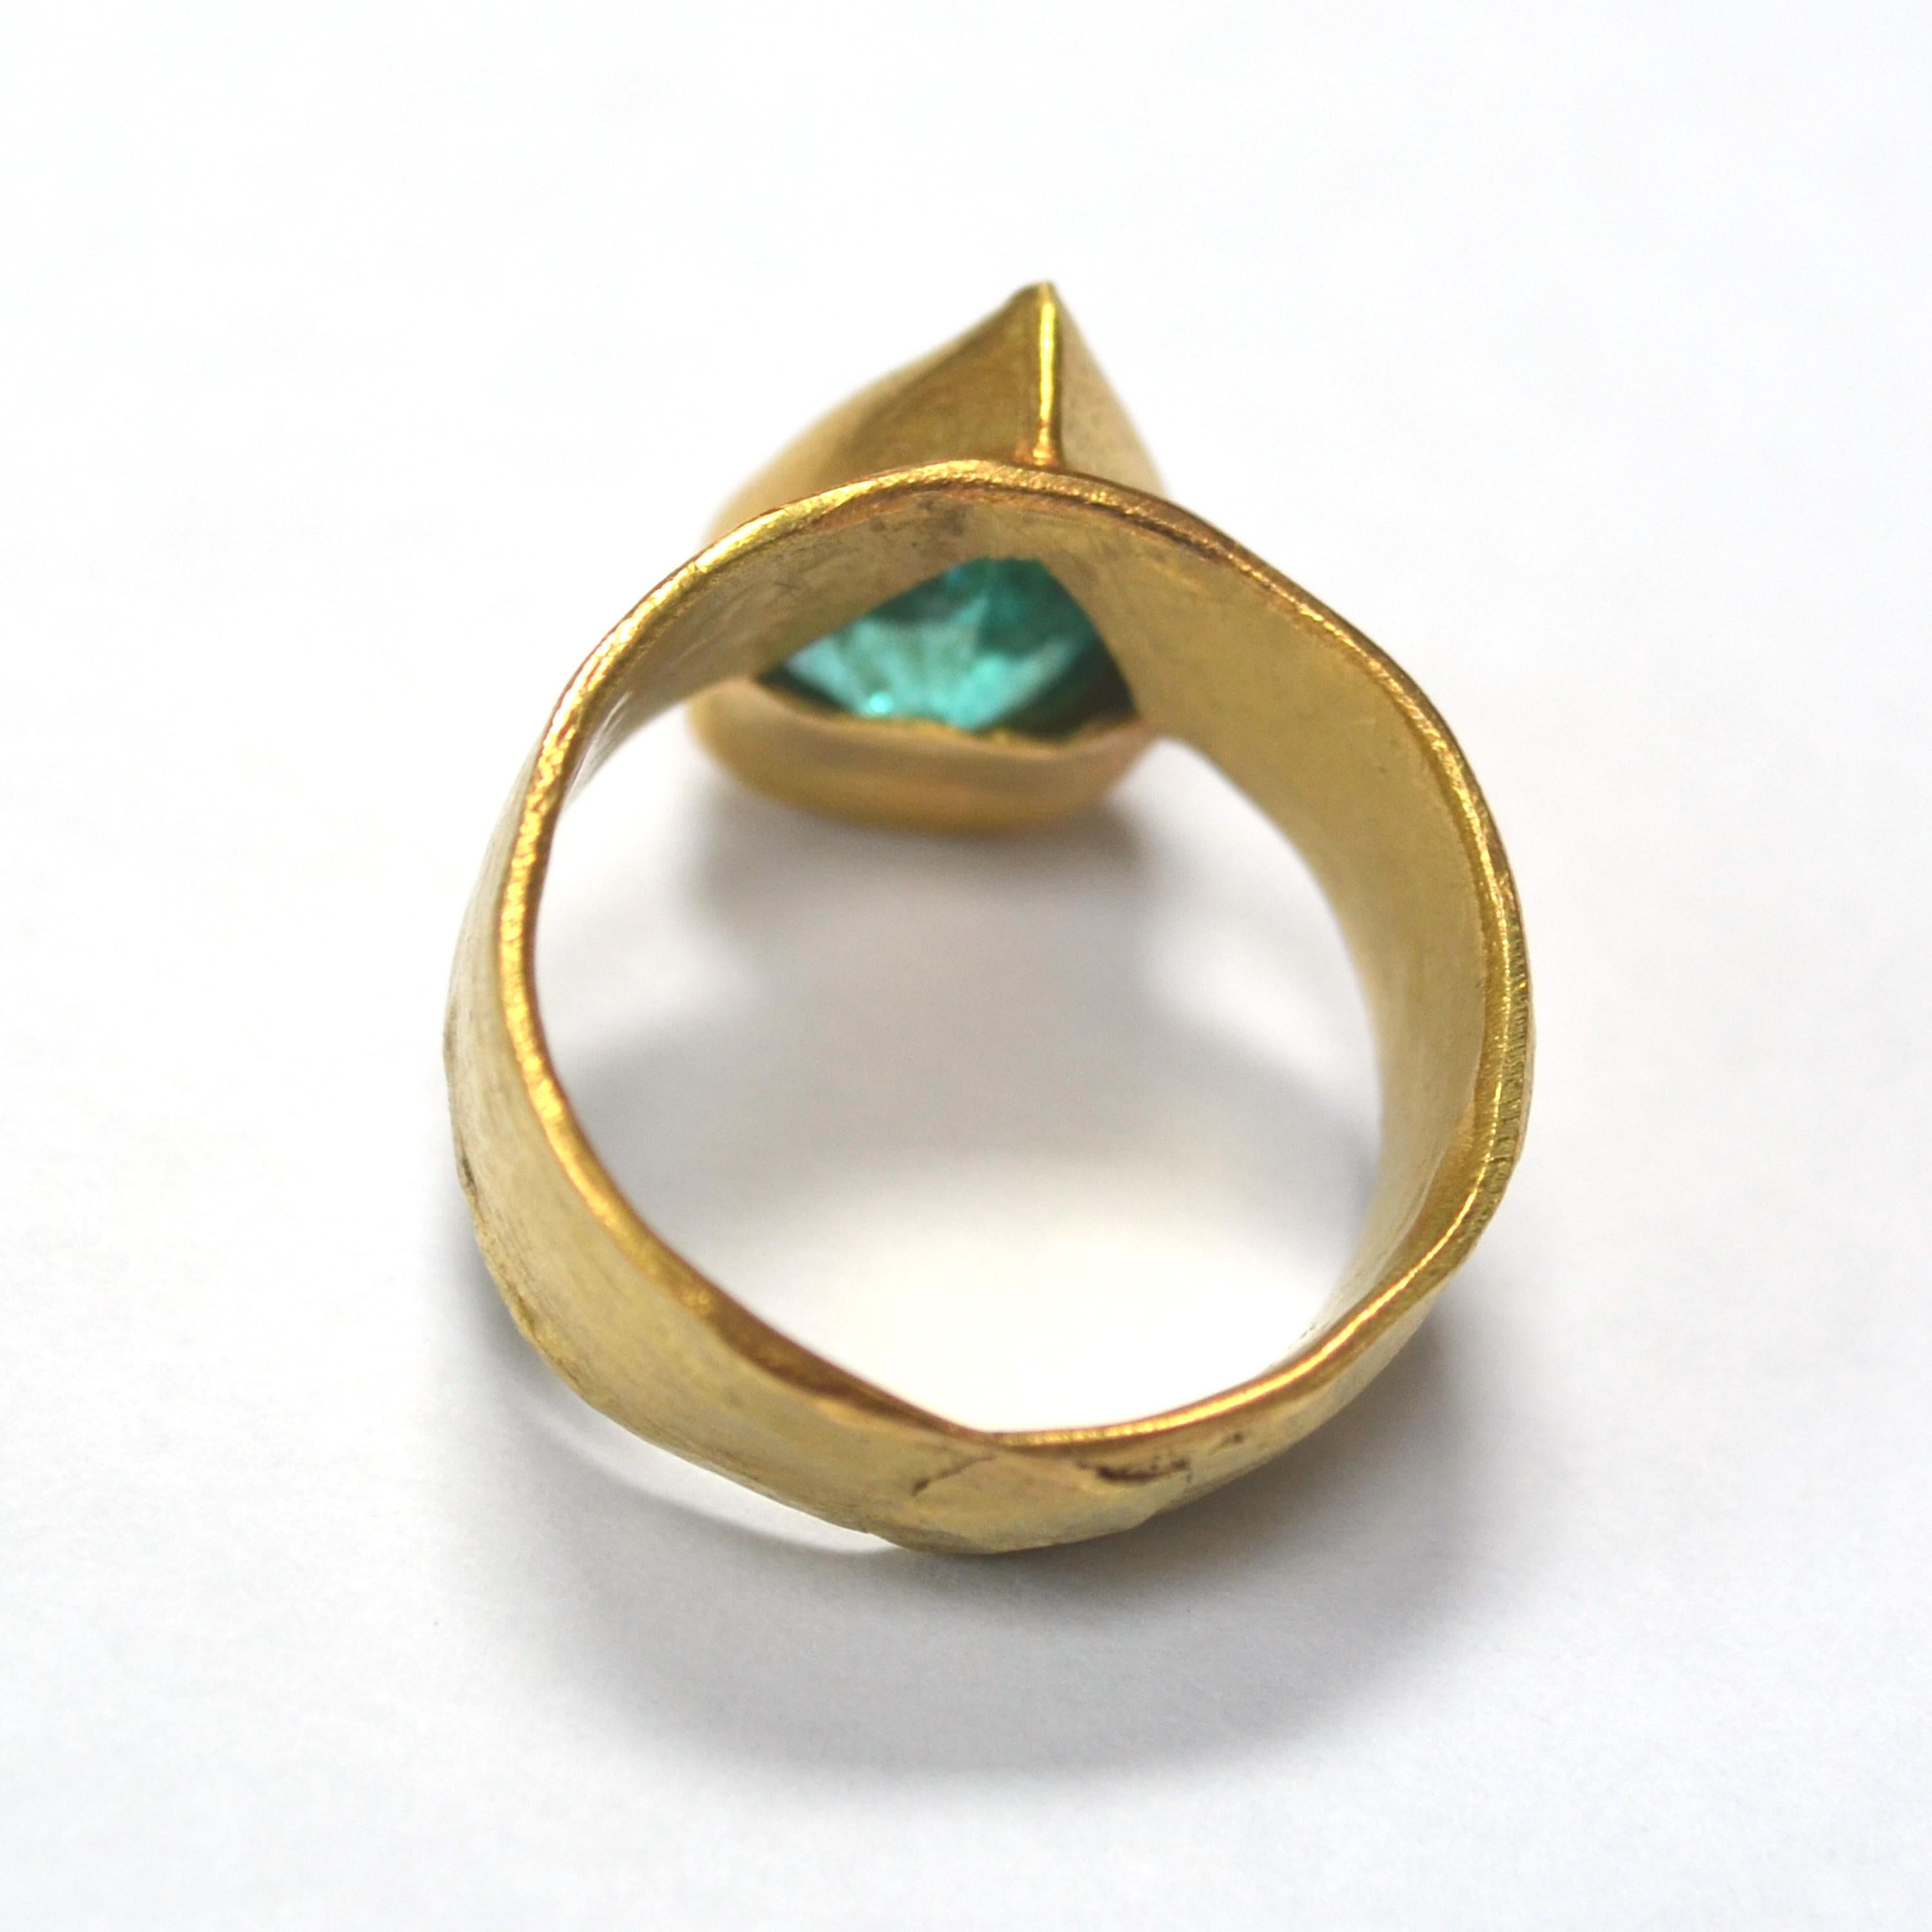 18k yellow Gold wide hammered textured ring with stunning sea-blue Paraiba type Tourmaline. Like a drop of Mediterranean Sea, the incandescent glow that comes from within the stone means you can be reminded of the warmth of a Greek Island or Italian